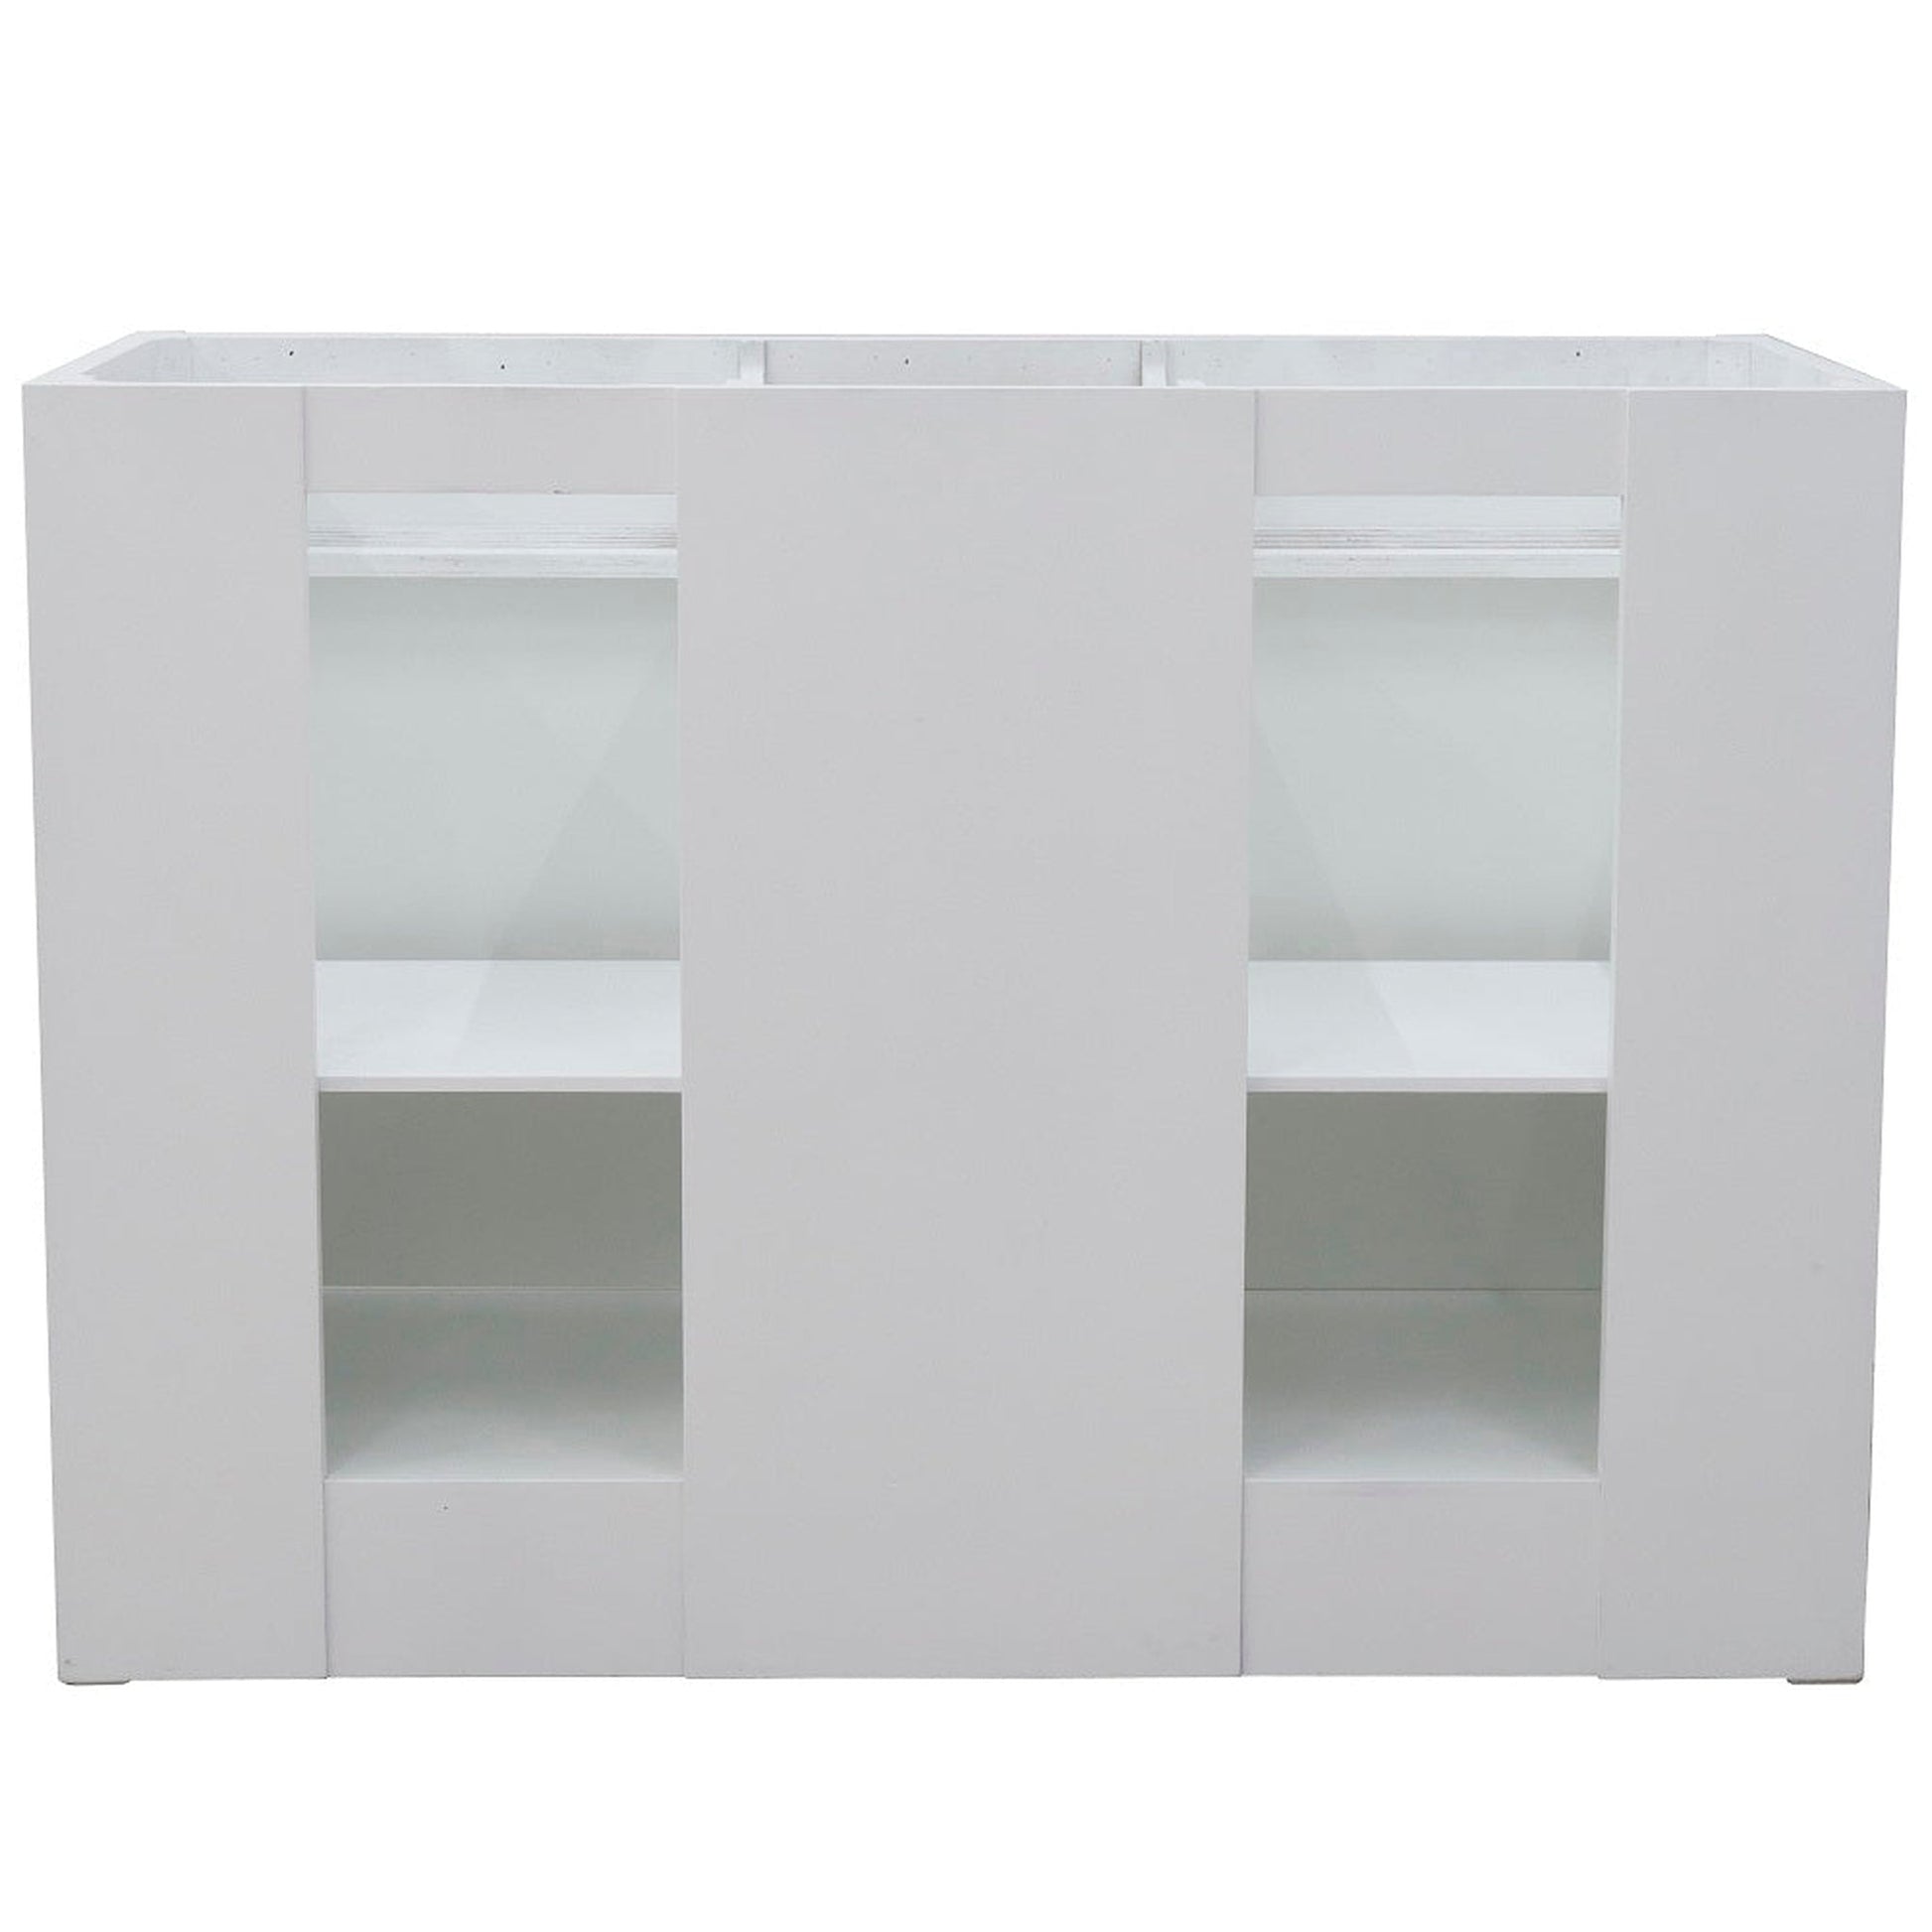 Bellaterra Home Terni 49" 2-Door 2-Drawer White Freestanding Vanity Set With Ceramic Double Undermount Oval Sink and White Carrara Marble Top